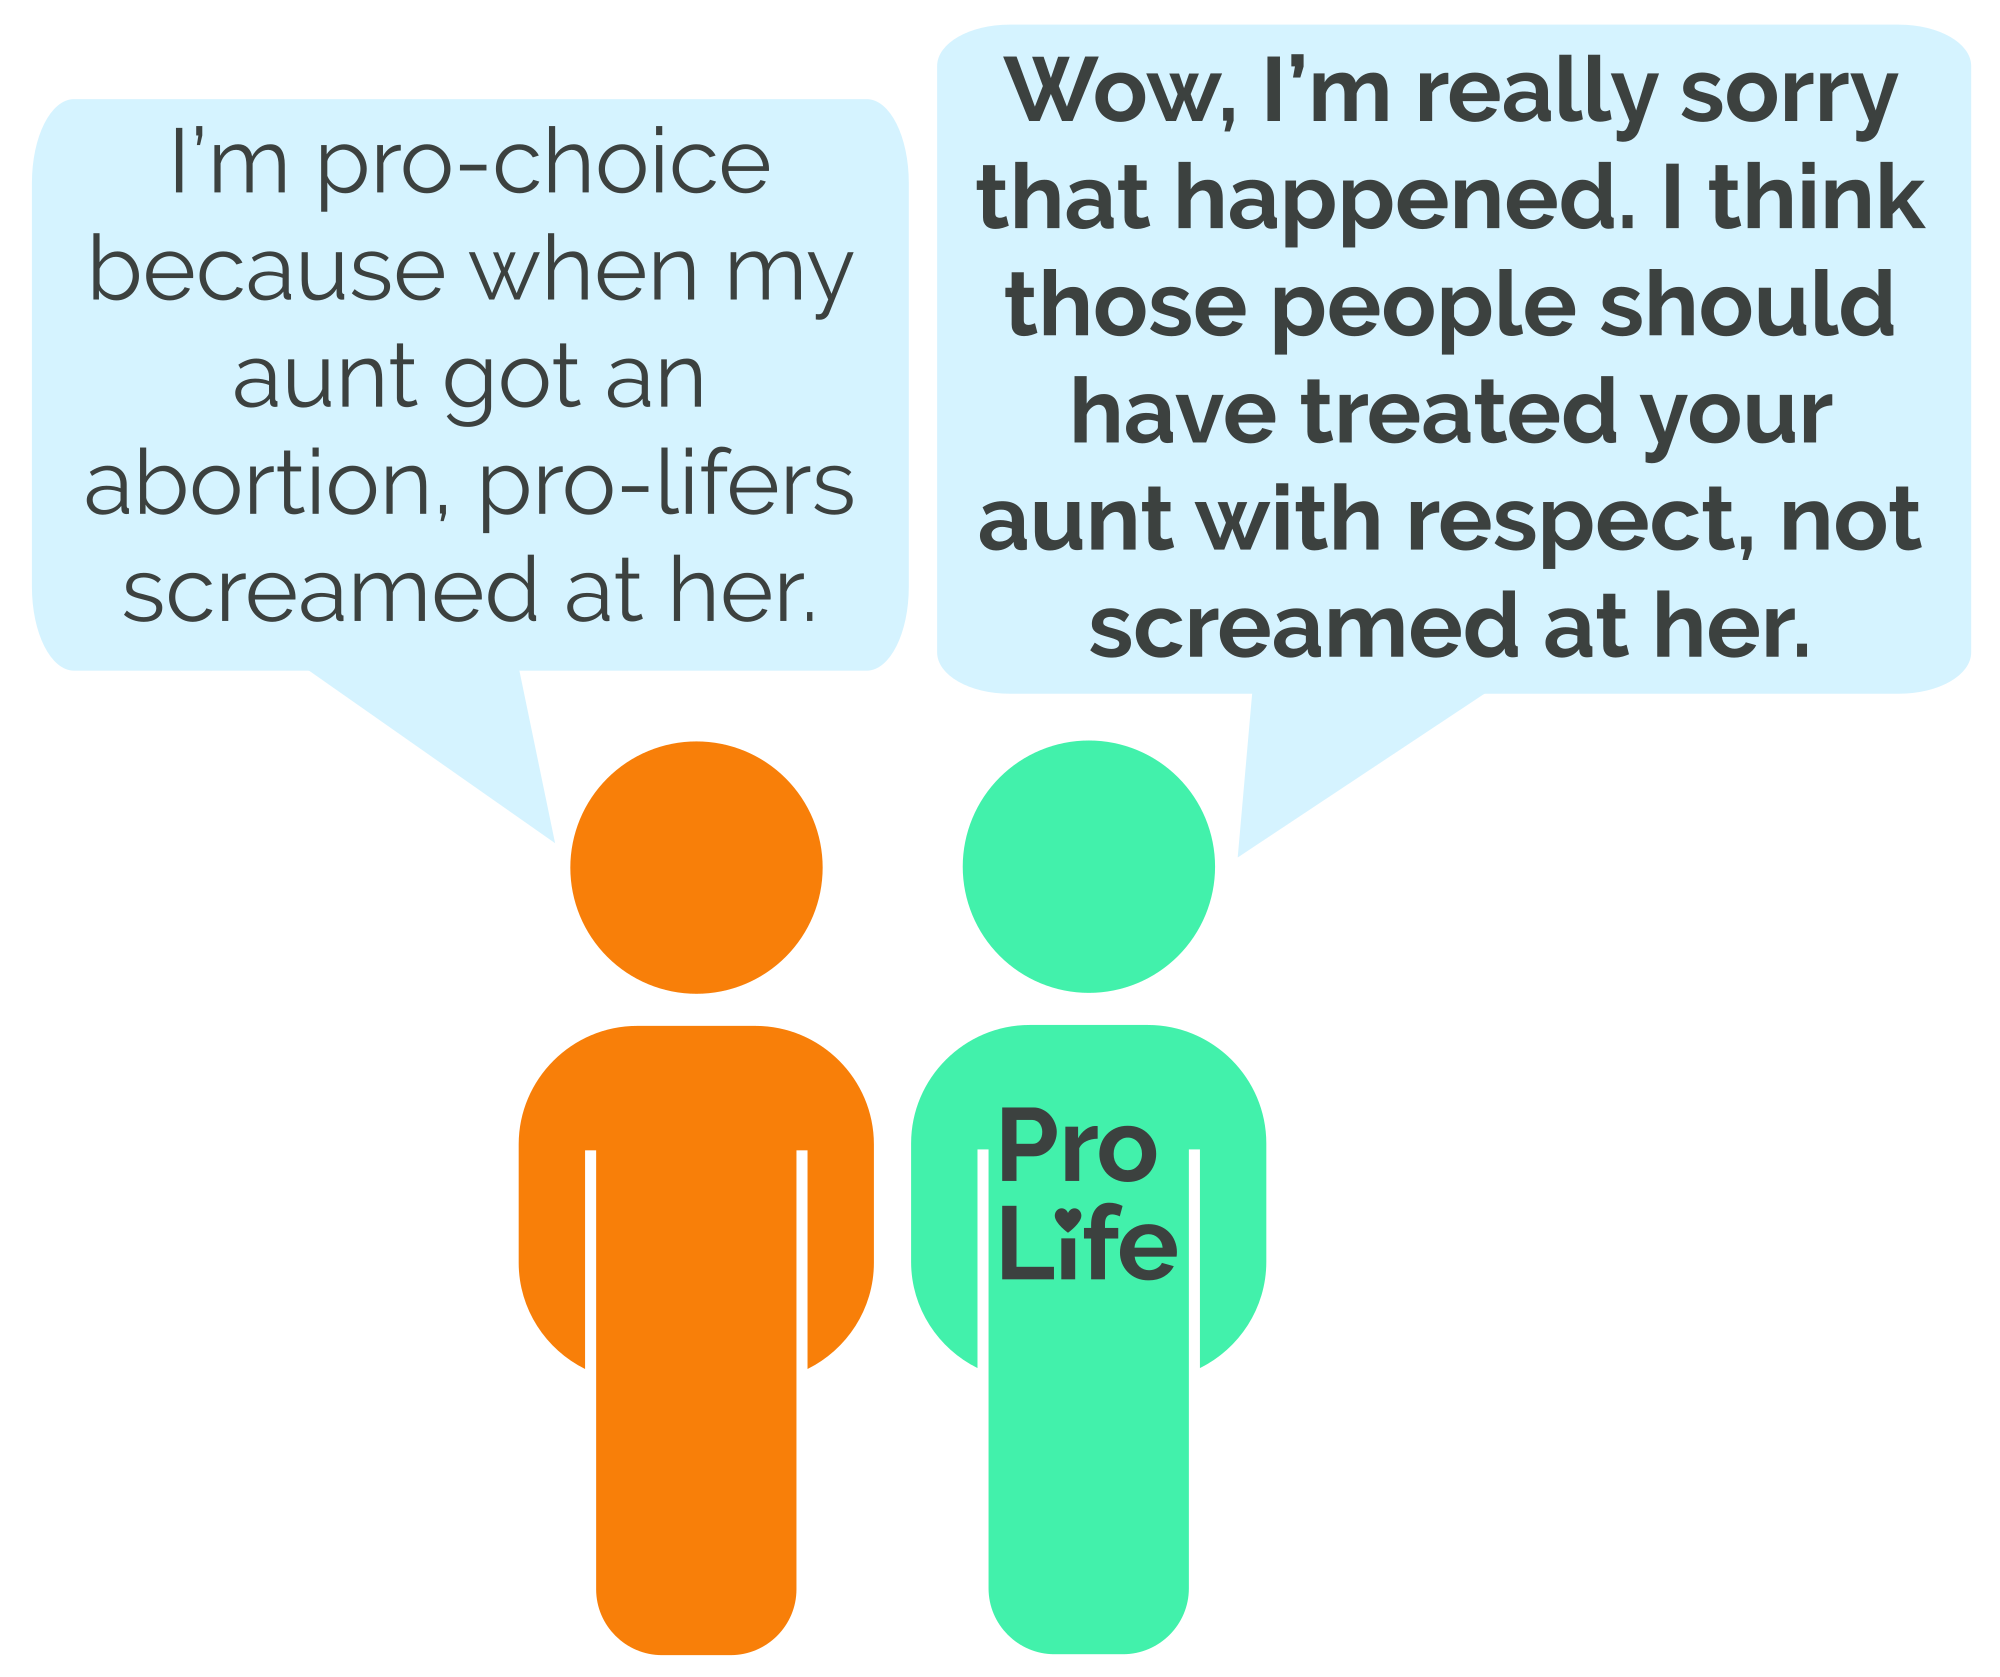 Person 1: I’m pro-choice because when my aunt got an abortion, pro-lifers screamed at her. Person 2 (our hero): Wow, I’m really sorry that happened. I think those people should have treated your aunt with respect, not screamed at her. 